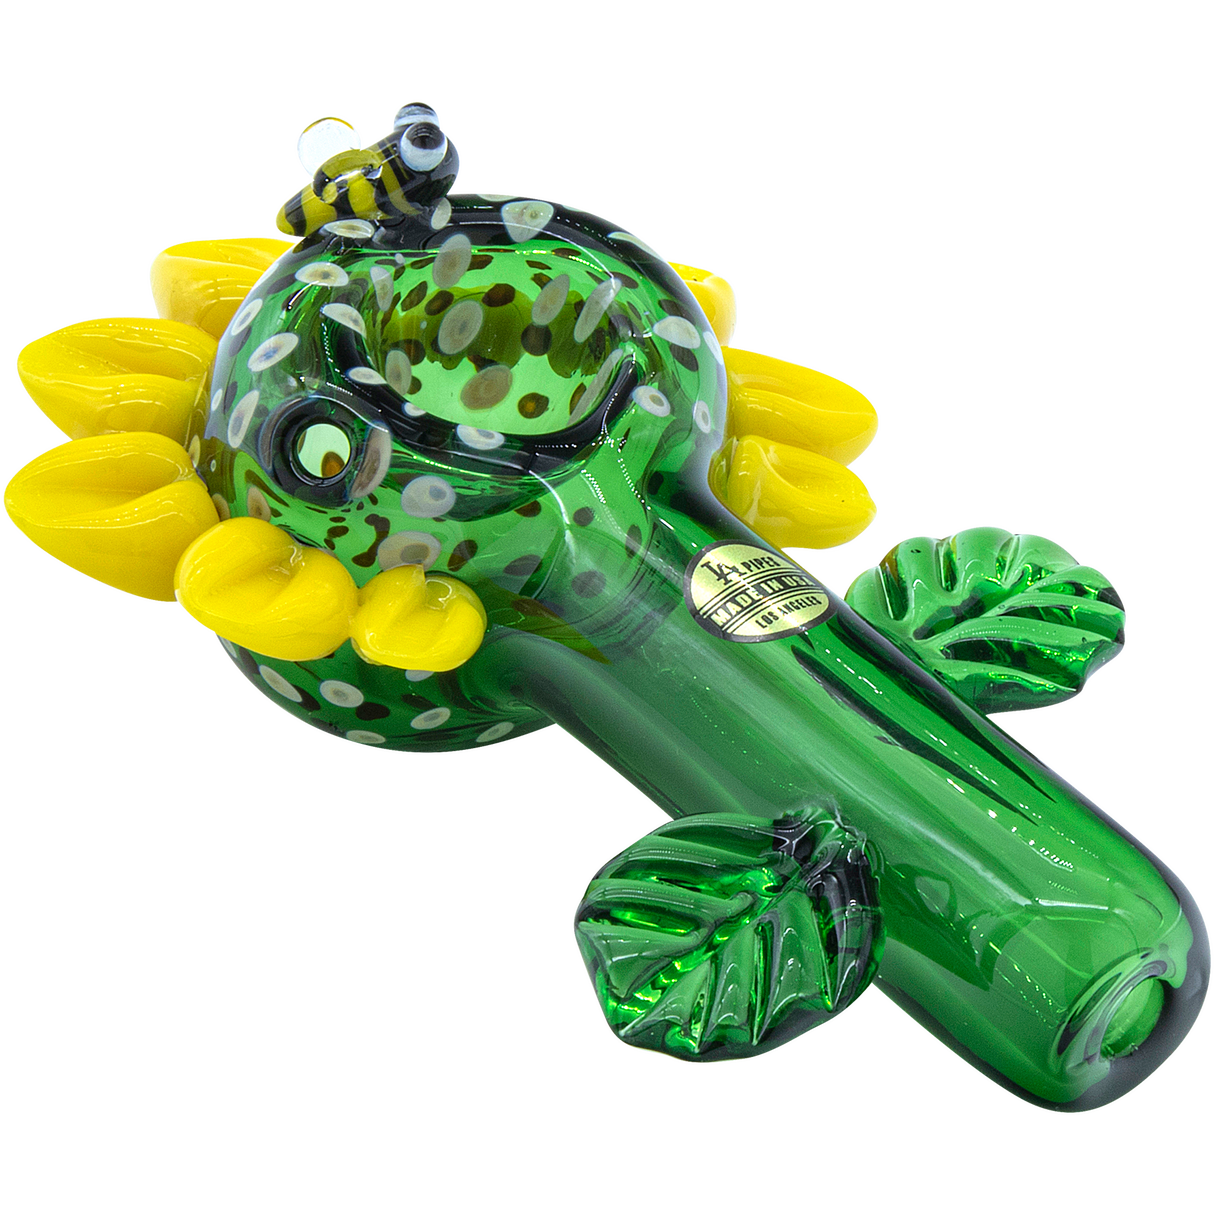 LA Pipes "Sunny Sunflowers" Glass Pipe - Top View, Compact 4.65" Spoon Design